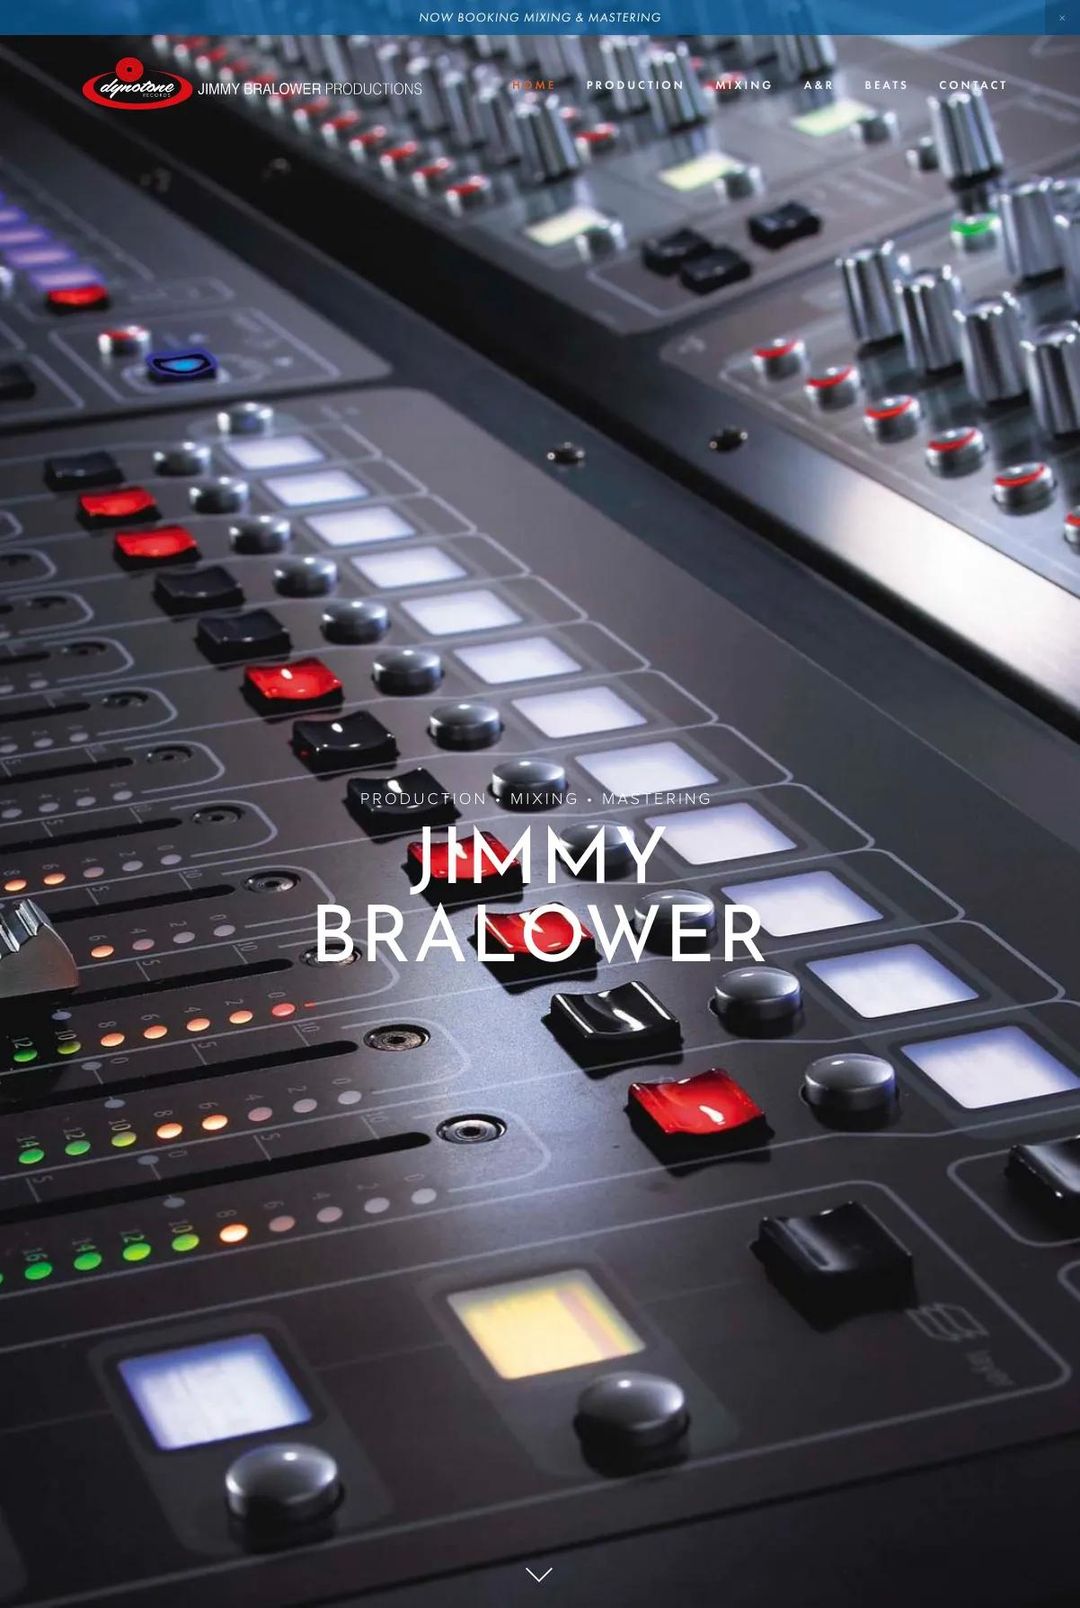 Screenshot 1 of Jimmy Bralower Productions (Example Squarespace Music Producer Website)